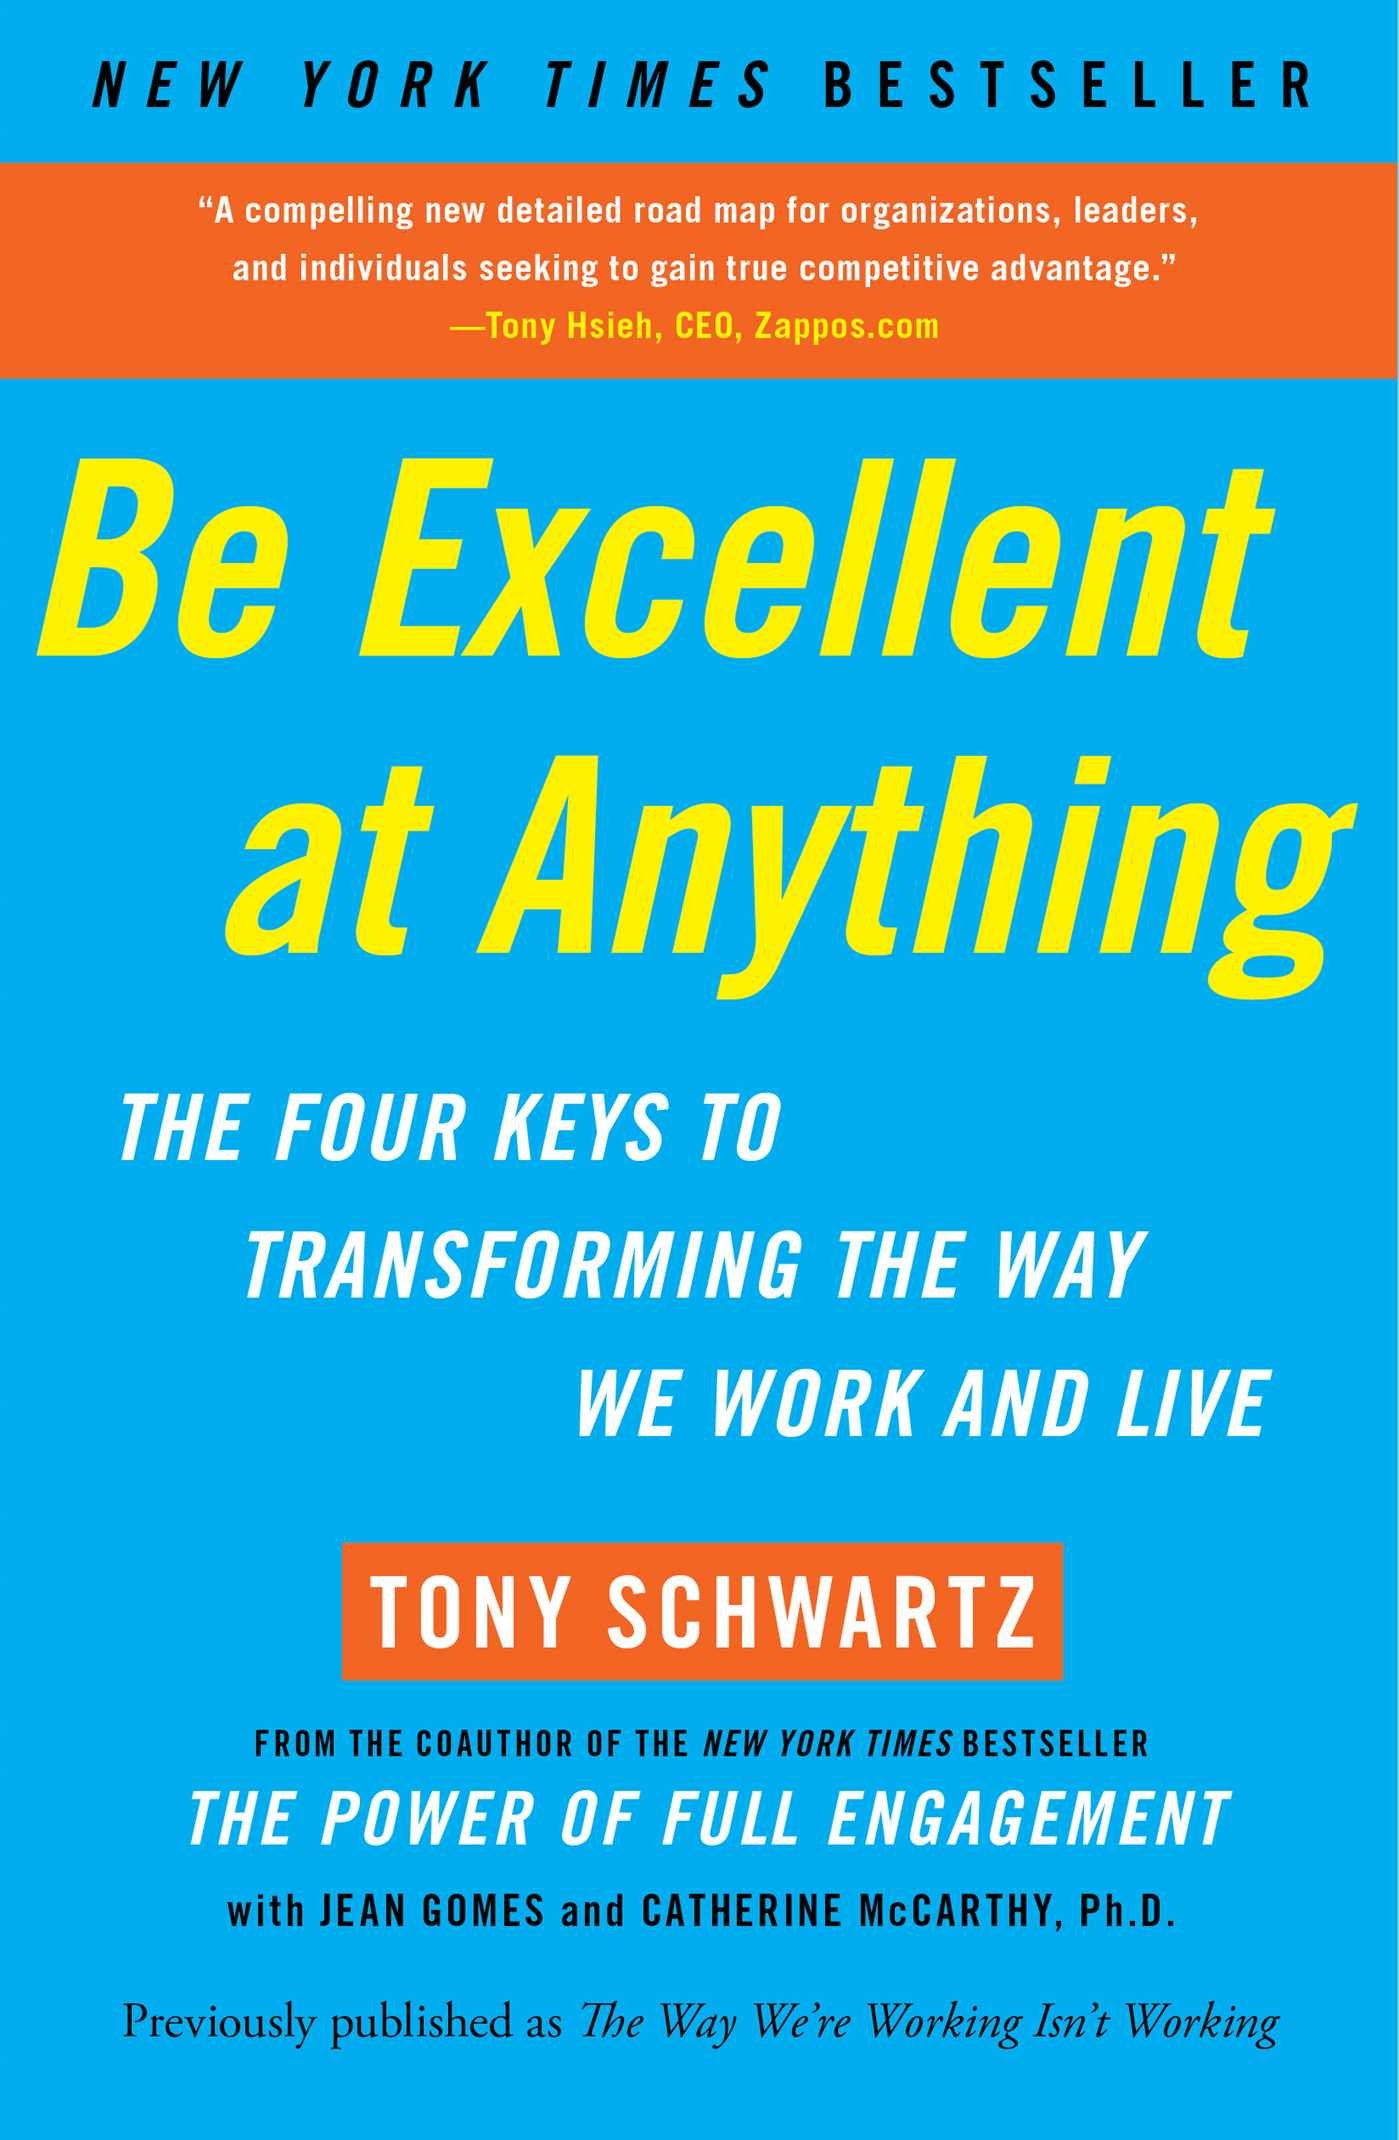 Be Excellent at Anything Summary